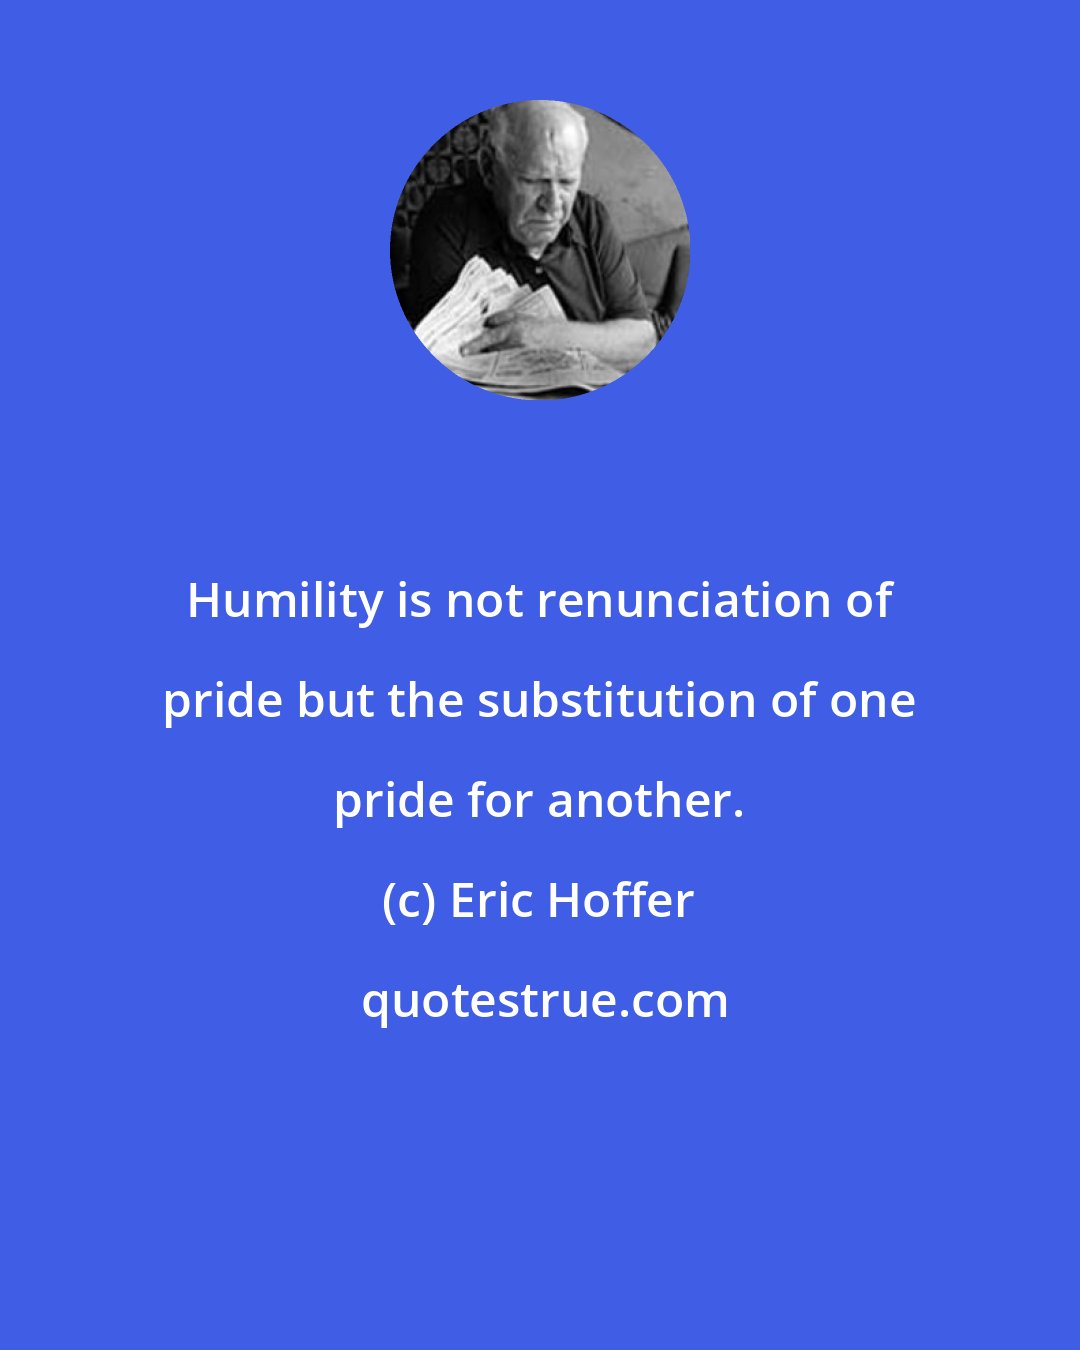 Eric Hoffer: Humility is not renunciation of pride but the substitution of one pride for another.